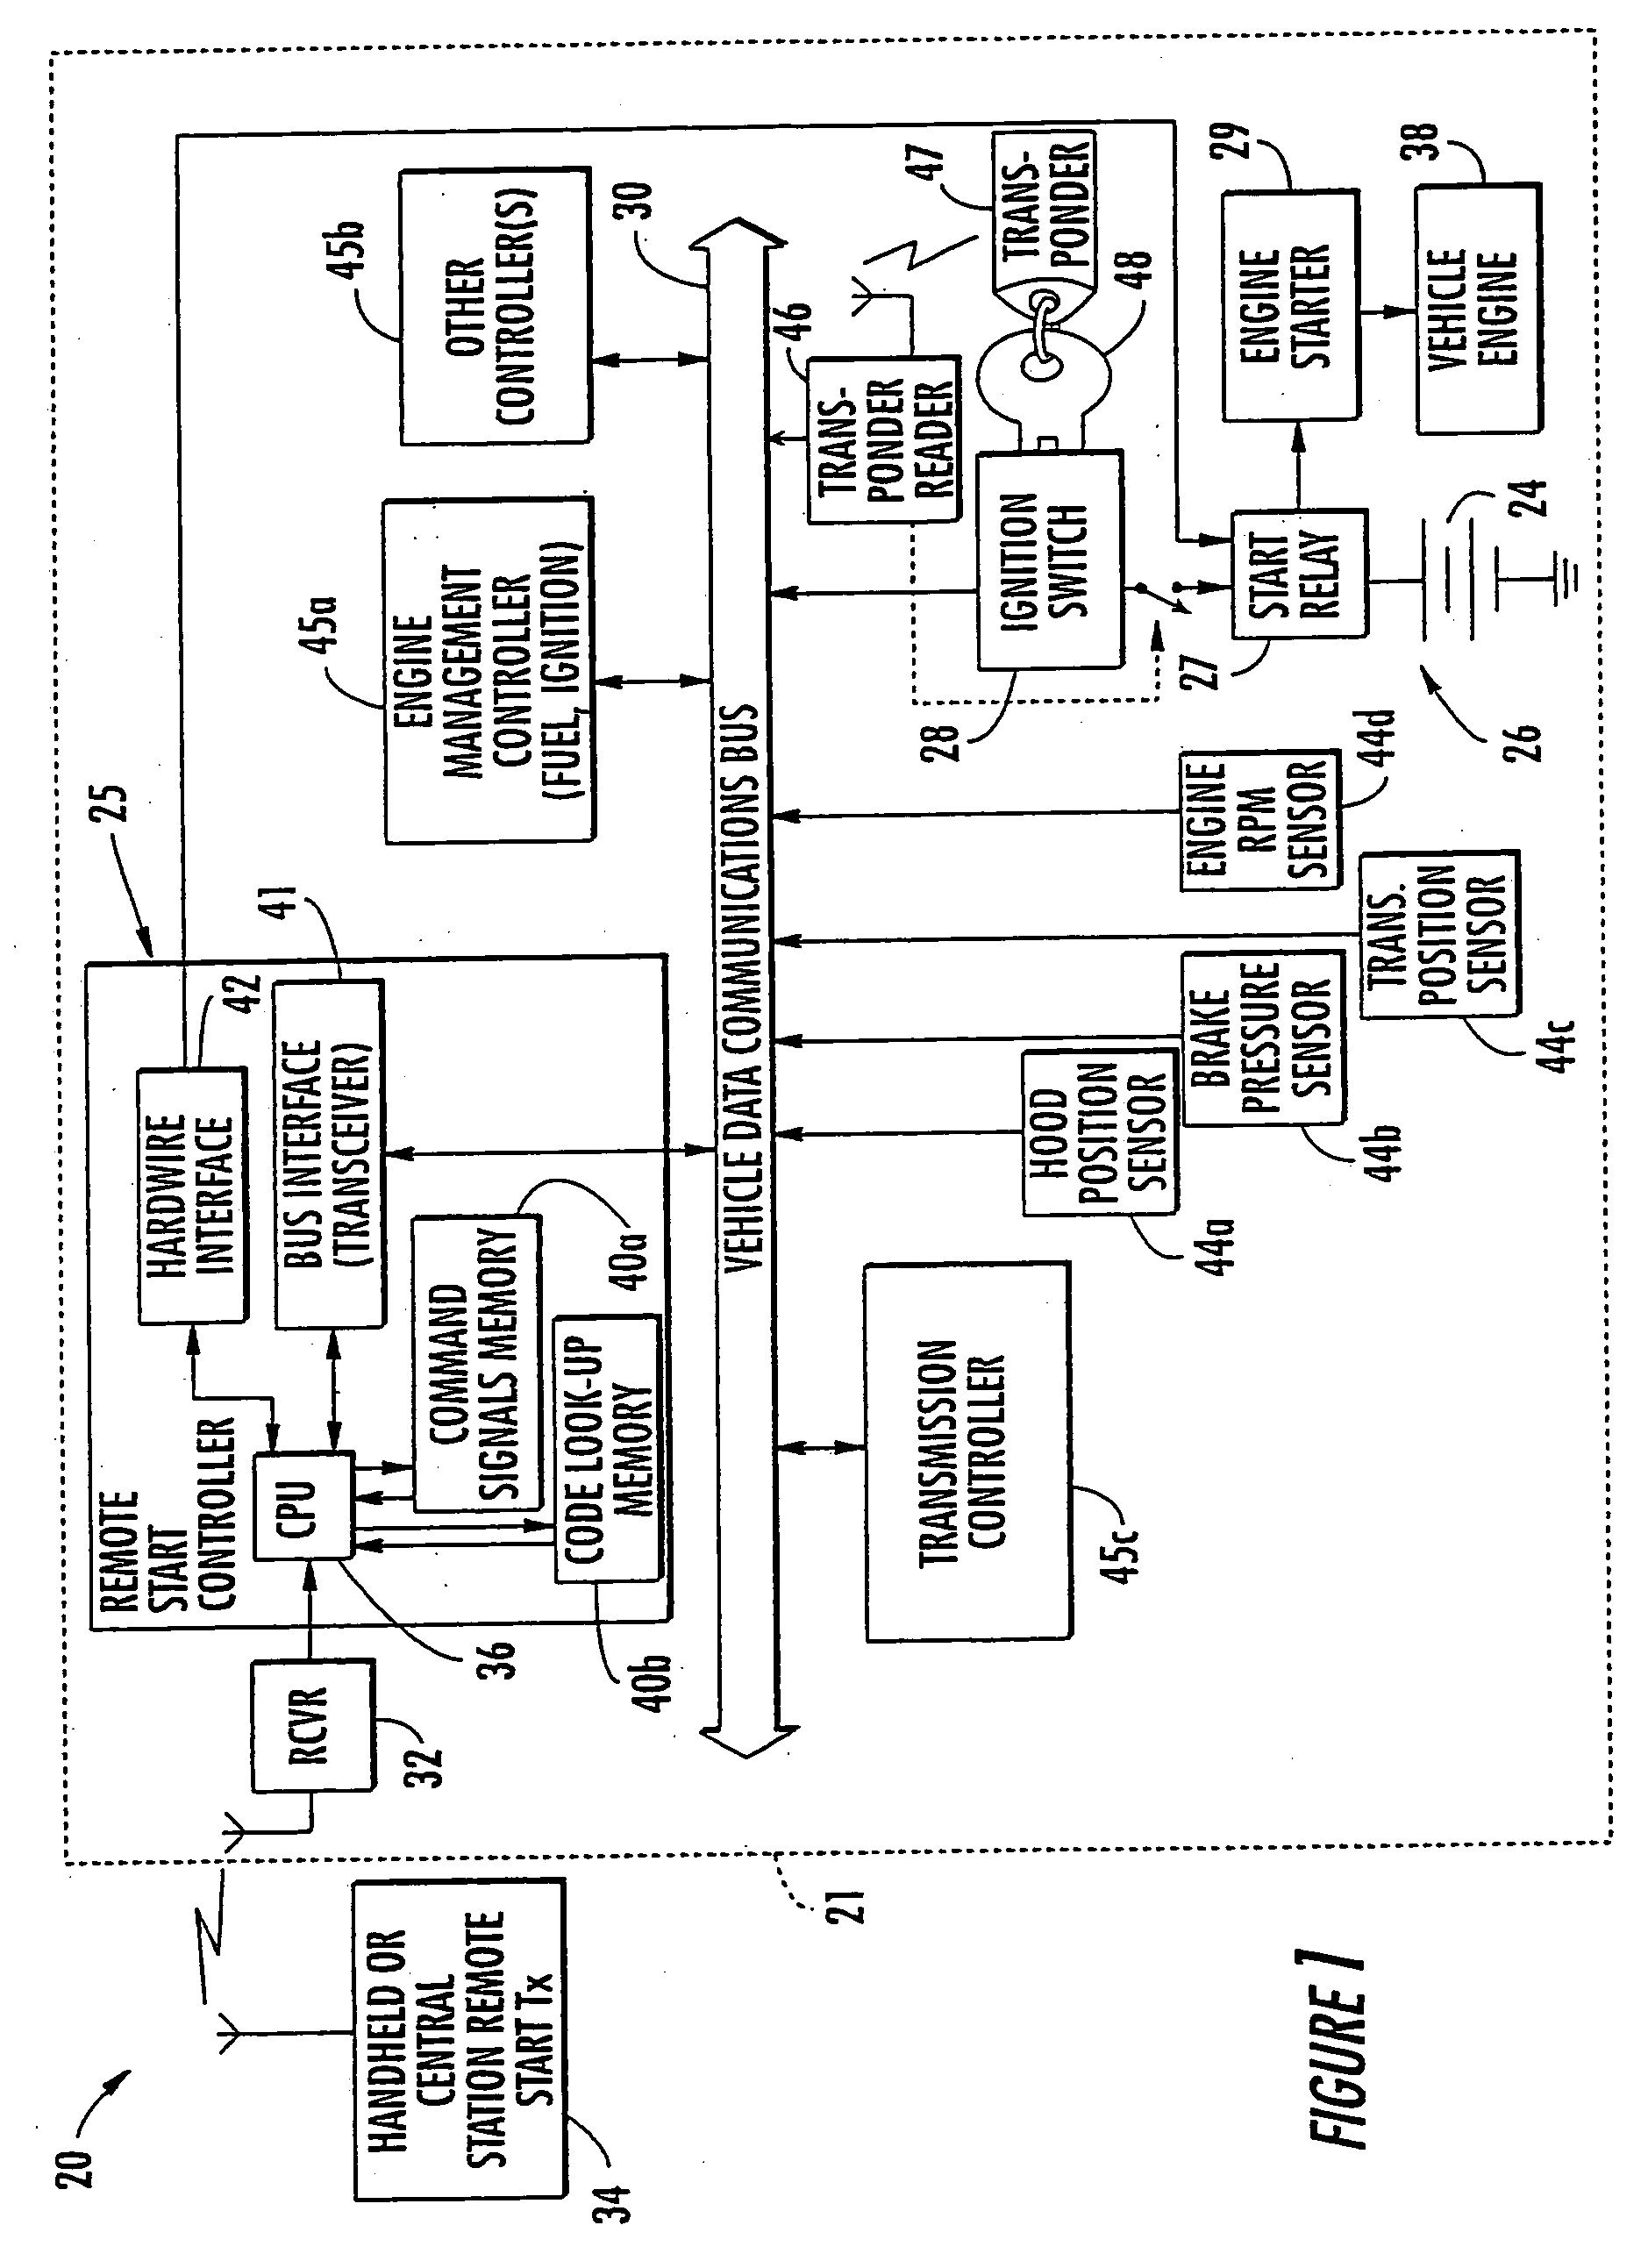 Remote start system for a vehicle having a data communications bus and related methods